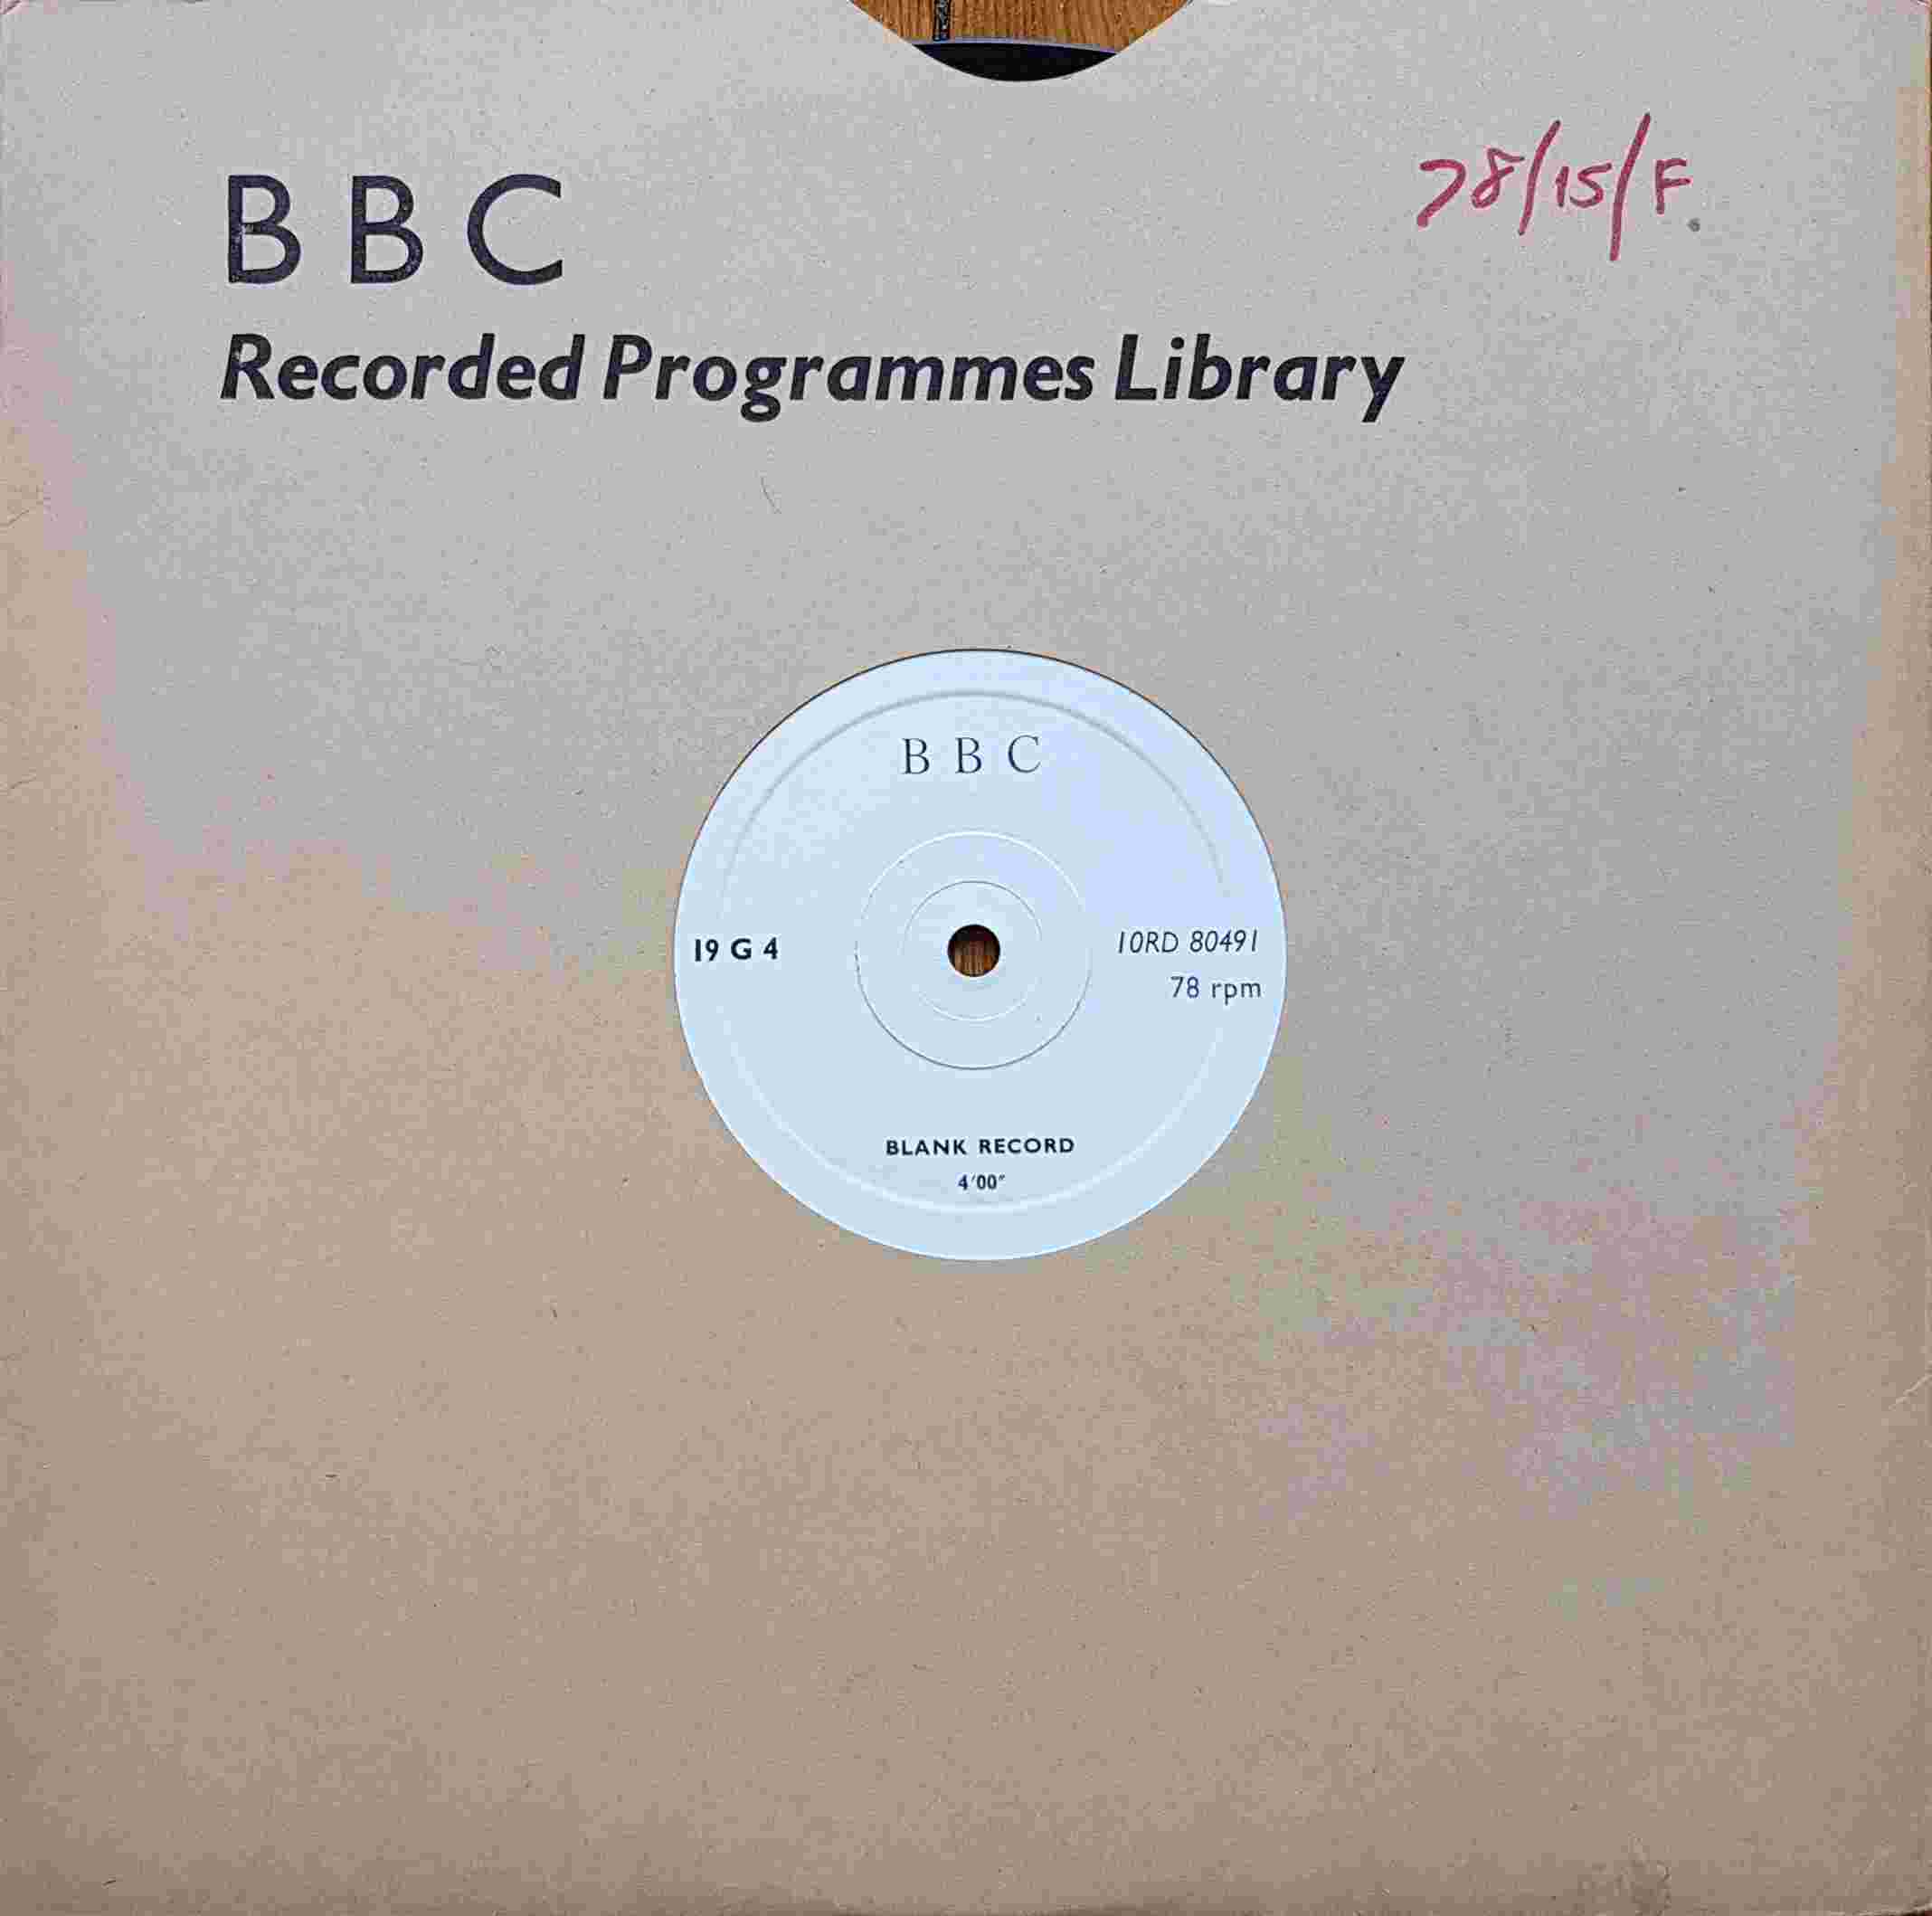 Picture of 19 G 4 Blank record by artist Not registered from the BBC 10inches - Records and Tapes library